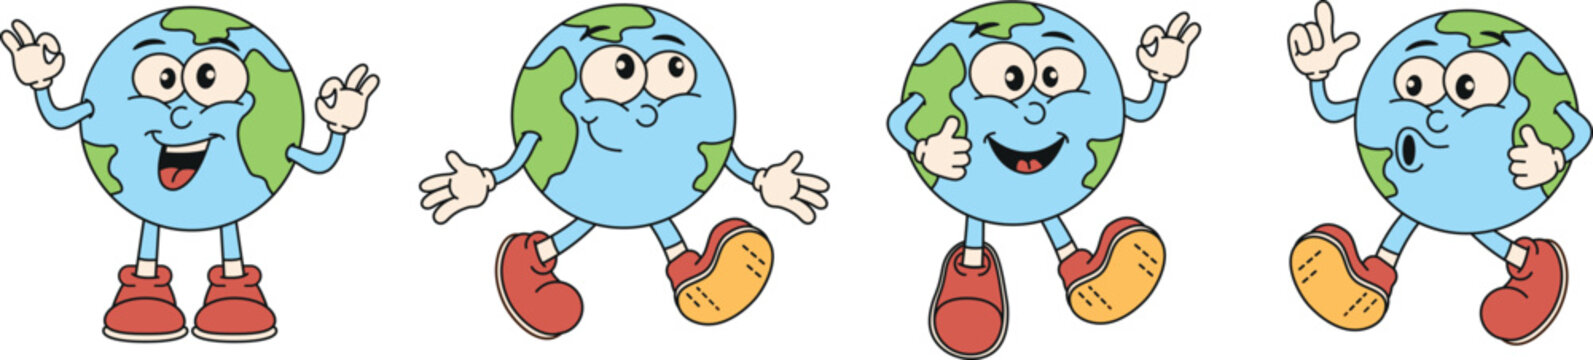 Character cartoon retro planet Earth. The concept of earth day and save the planet. Environment. Clockwork illustration in the style of the 70s. Vector illustration.